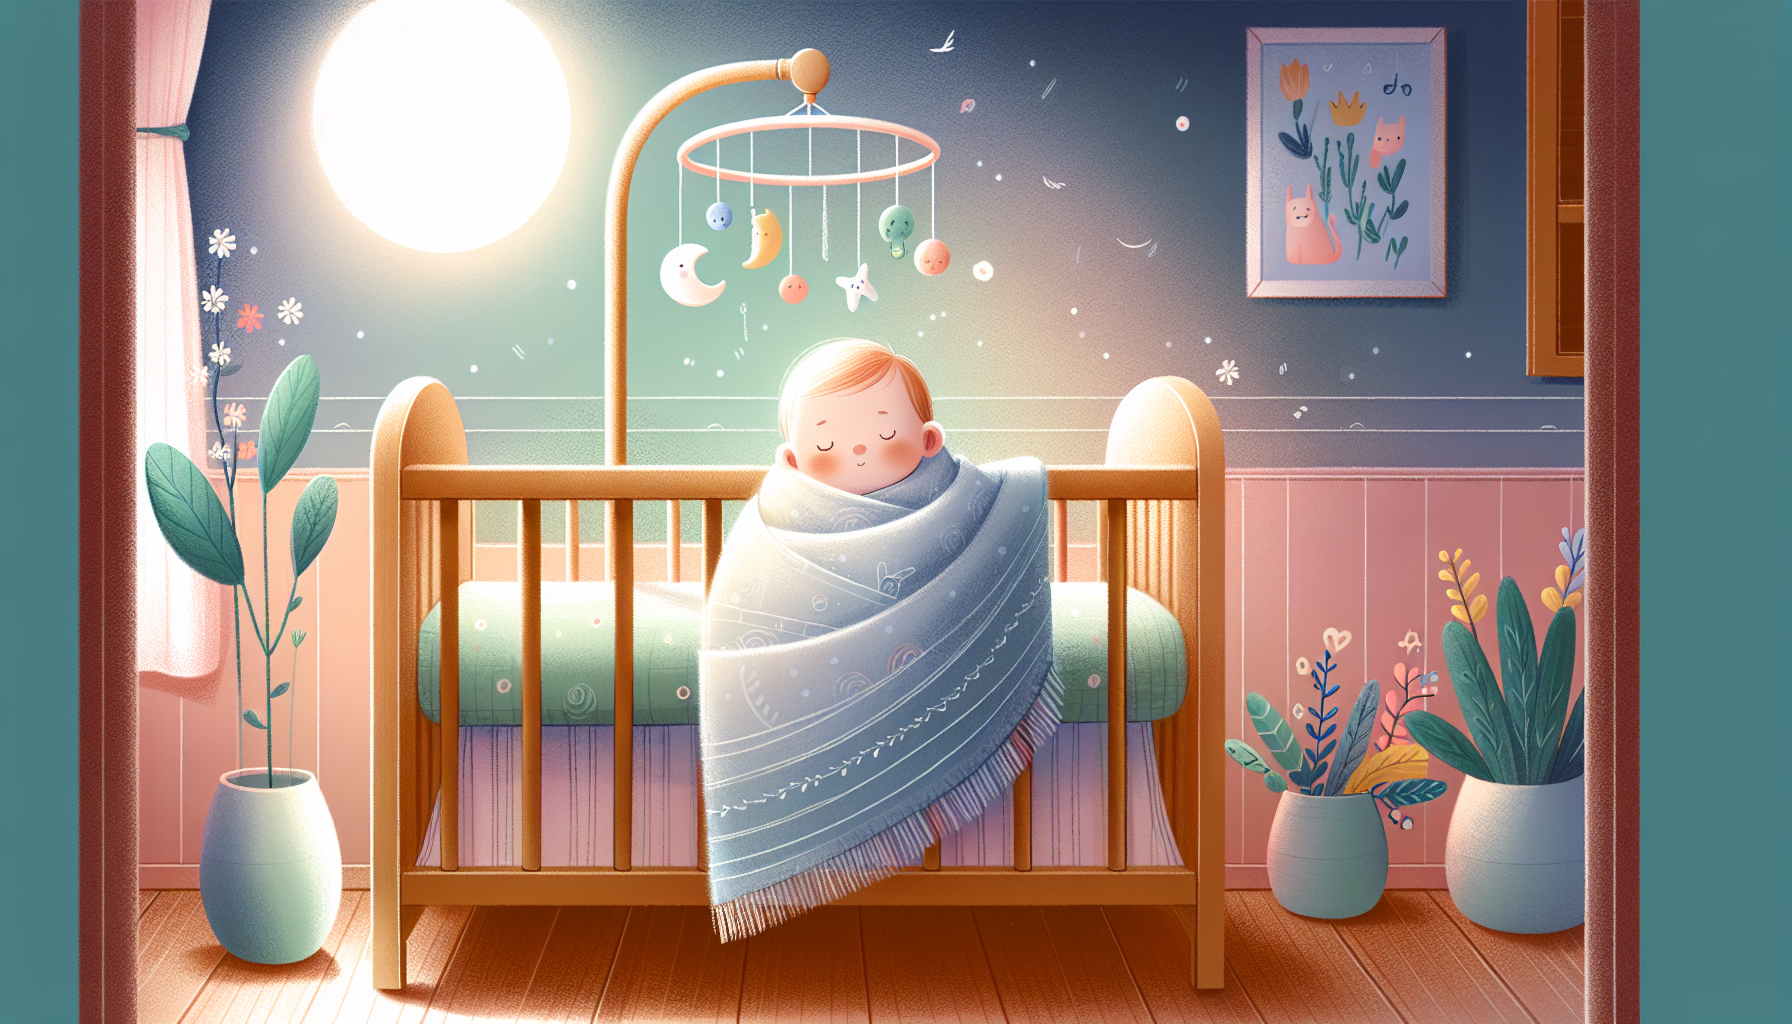 Illustration of a 12-month-old baby sleeping peacefully in a crib